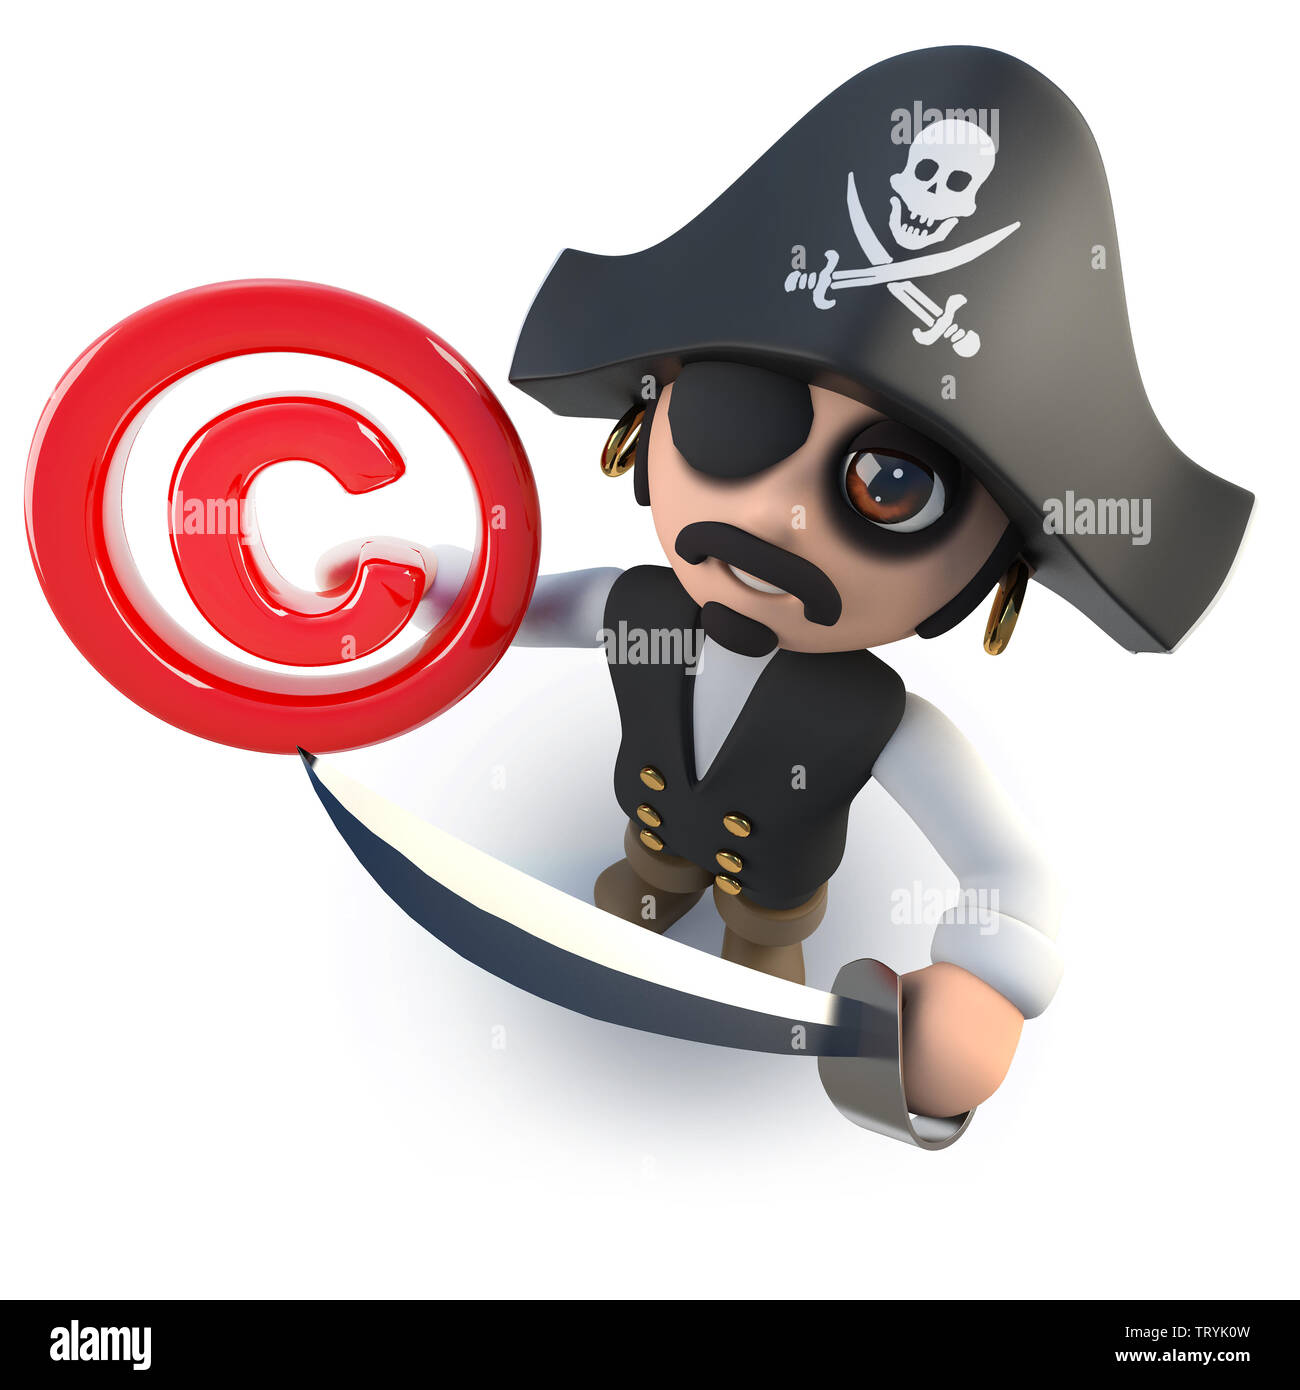 3d render of a funny cartoon pirate captain holding a copyright symbol Stock Photo